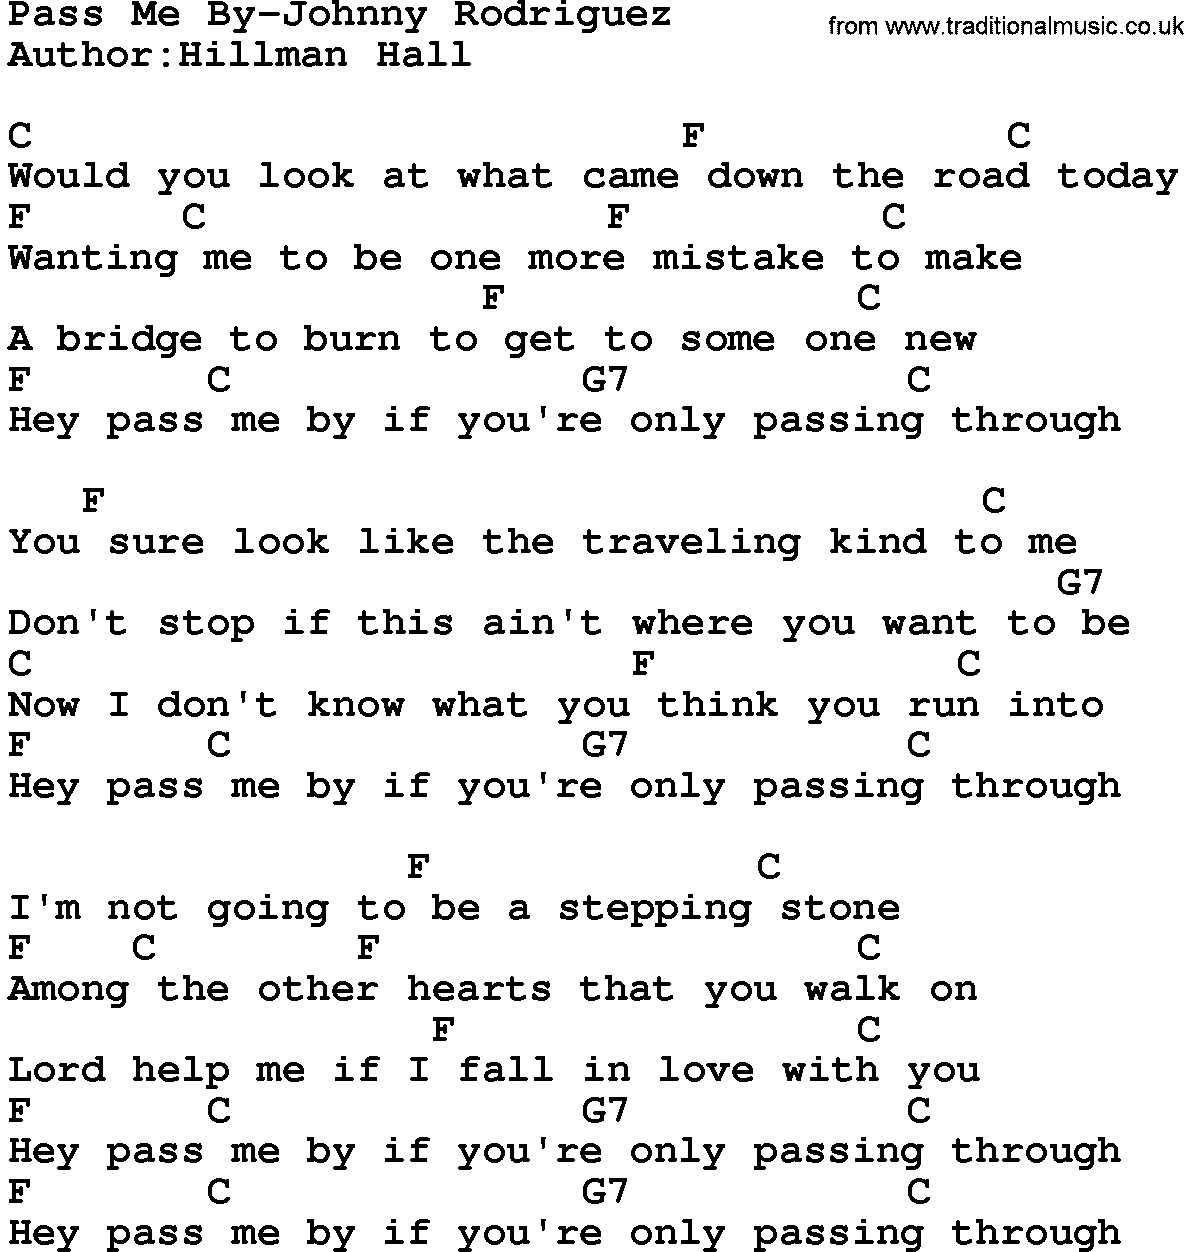 Country music song: Pass Me By-Johnny Rodriguez lyrics and chords